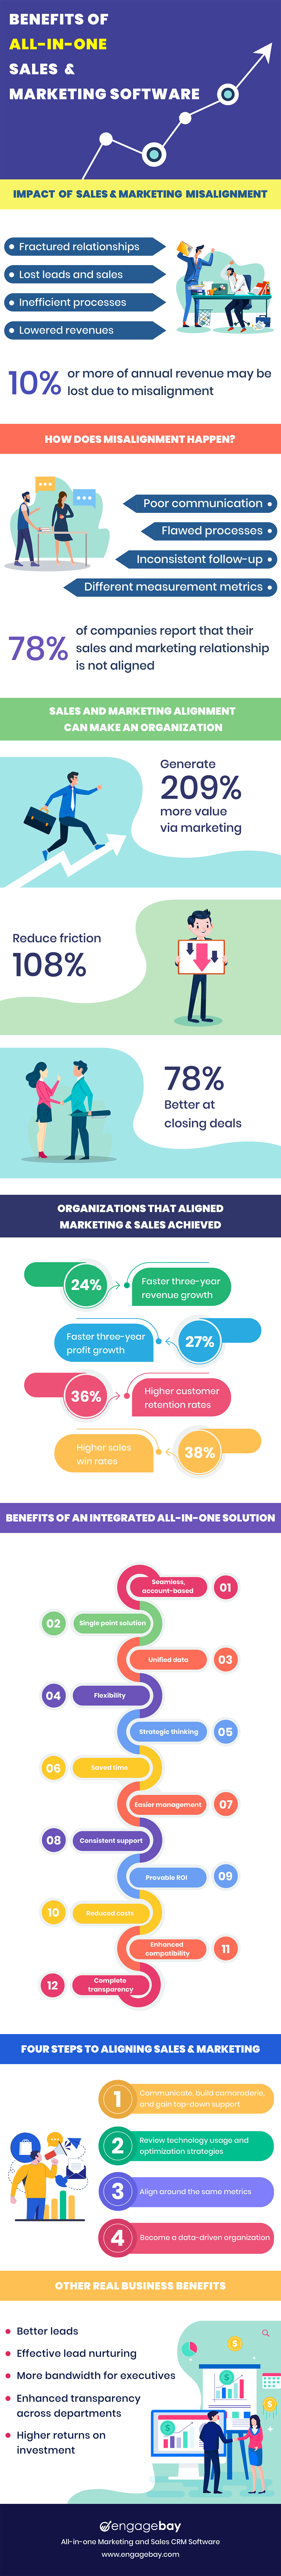 How to Align Sales and Marketing For a Rewarding Business